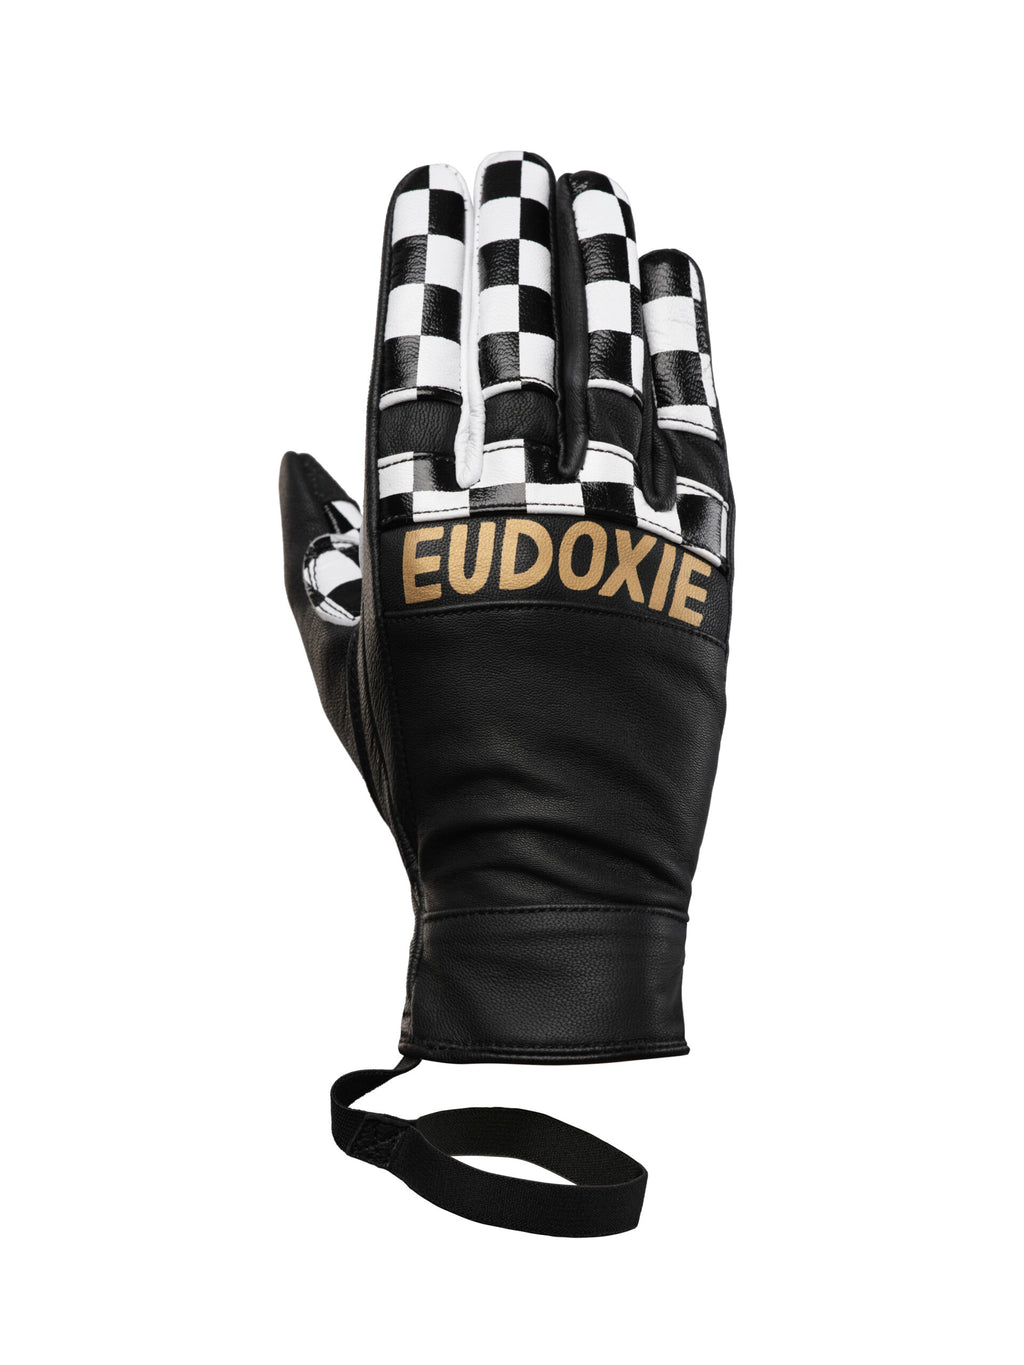 Eudoxie Gloves - Gold